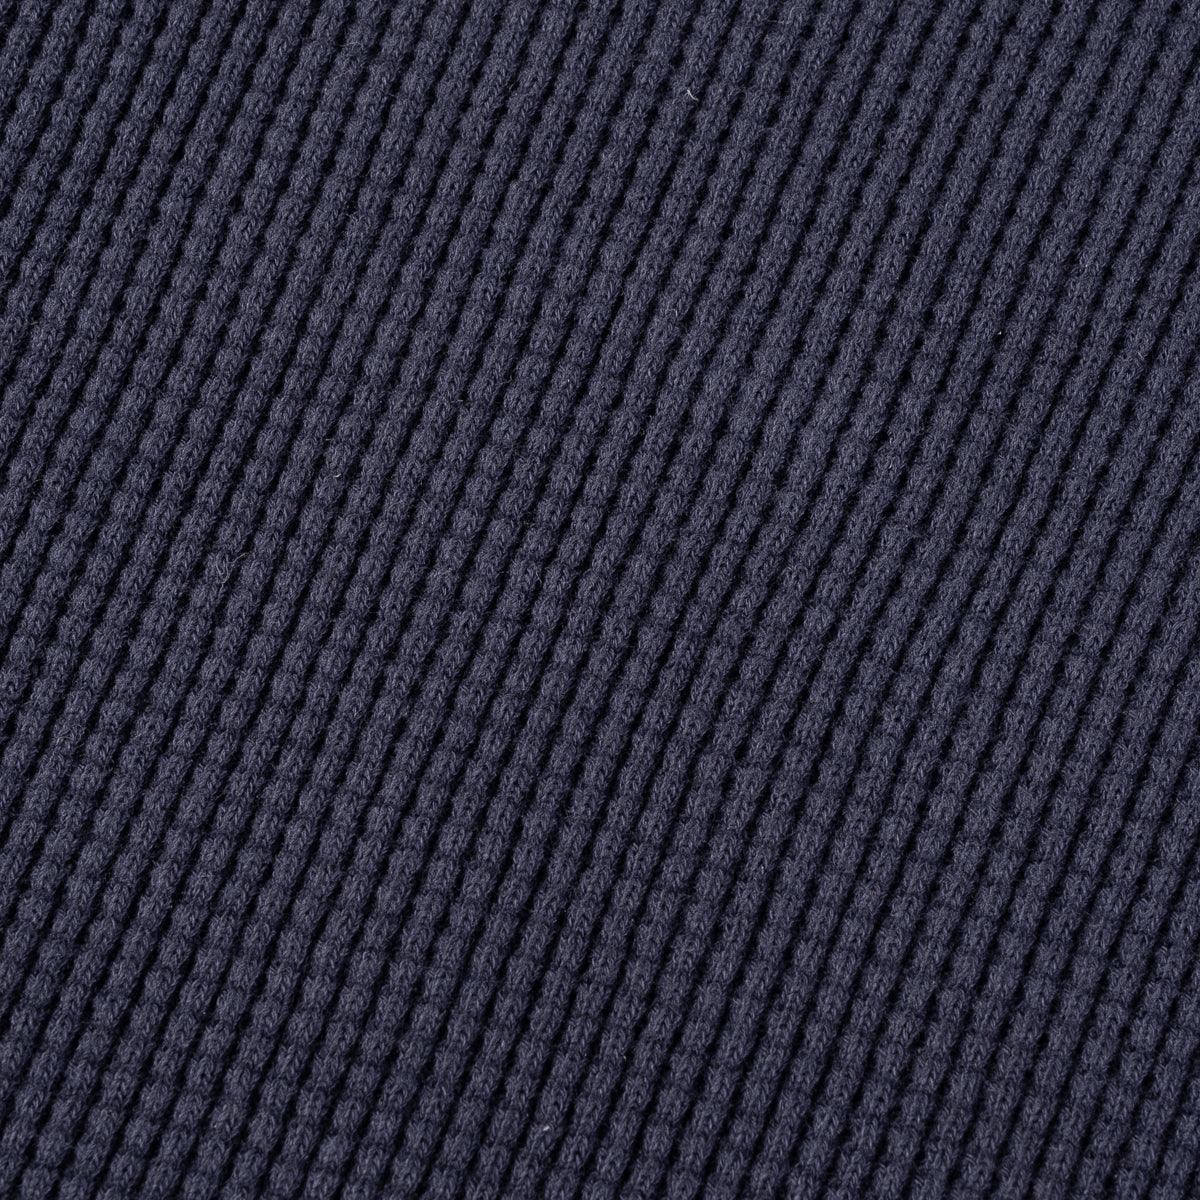 Image showing the IHTL-1301-NAV - Waffle Knit Thermal Longsleeve Navy which is a T-Shirts described by the following info Back In, IHSALE_M23, Iron Heart, Released, T-Shirts, Tops and sold on the IRON HEART GERMANY online store